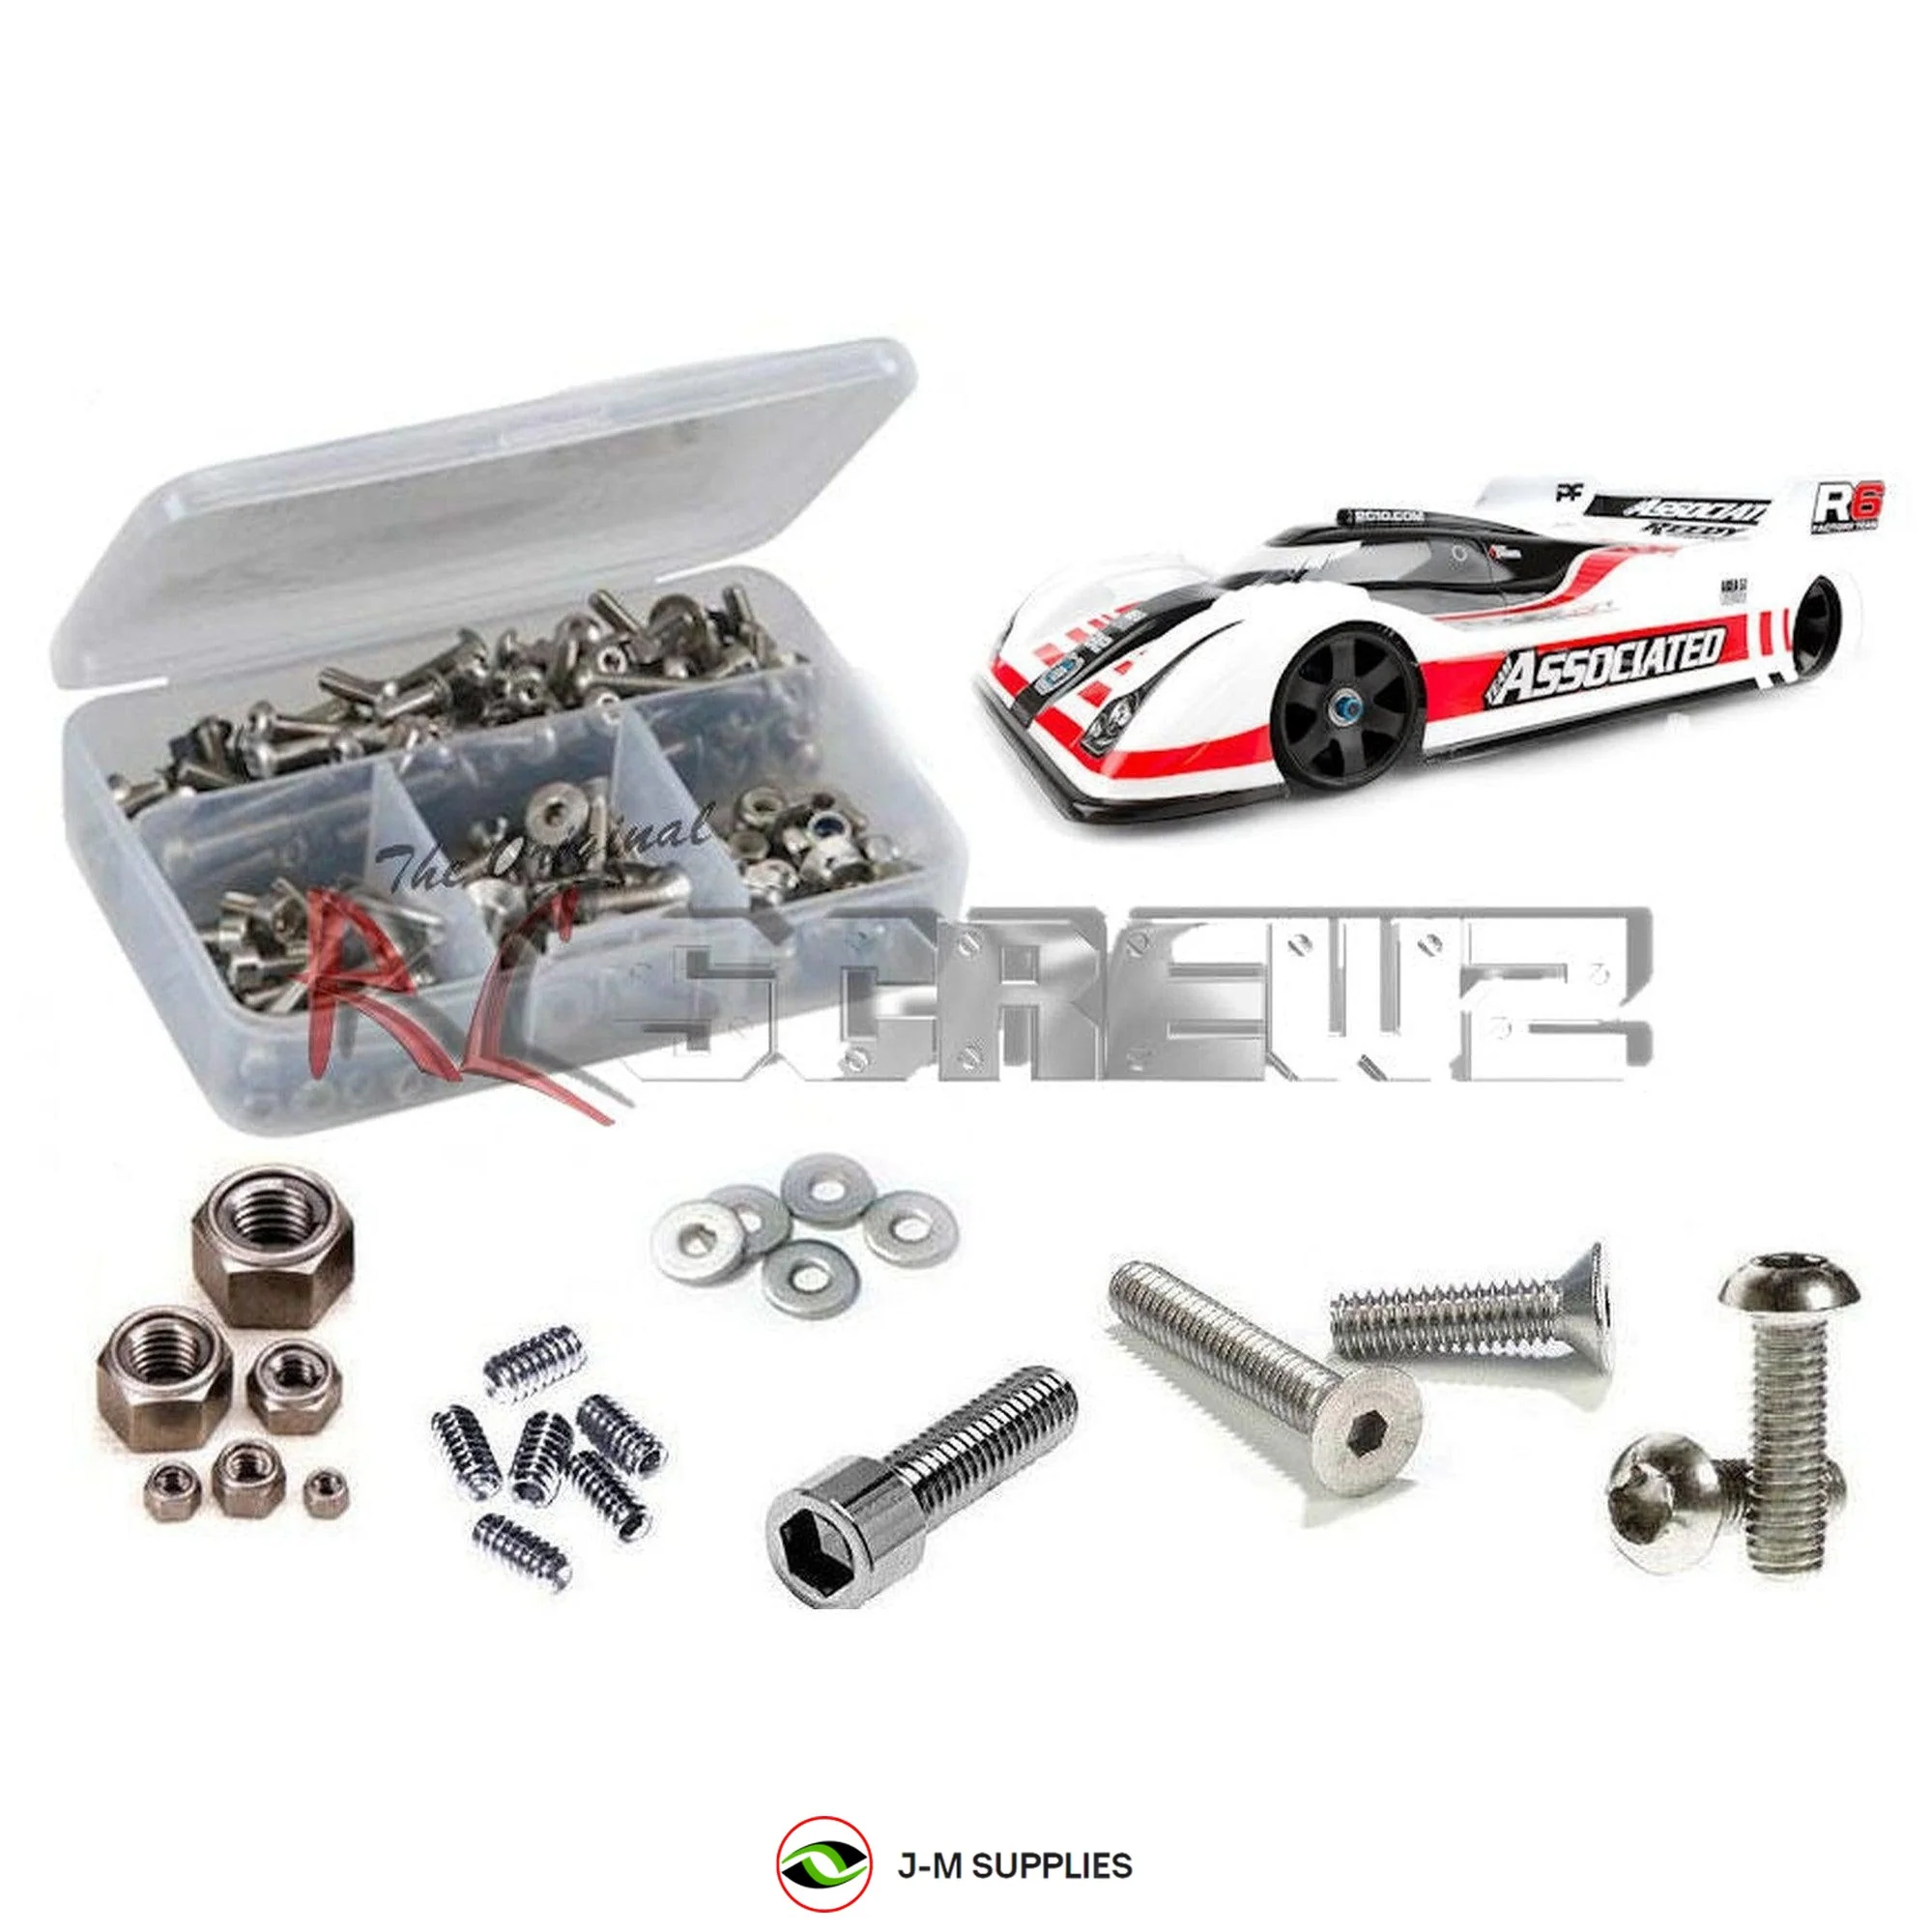 RCScrewZ Stainless Steel Screw Kit ass084 for Associated RC12 R6 Onroad 1/12th - Picture 1 of 12